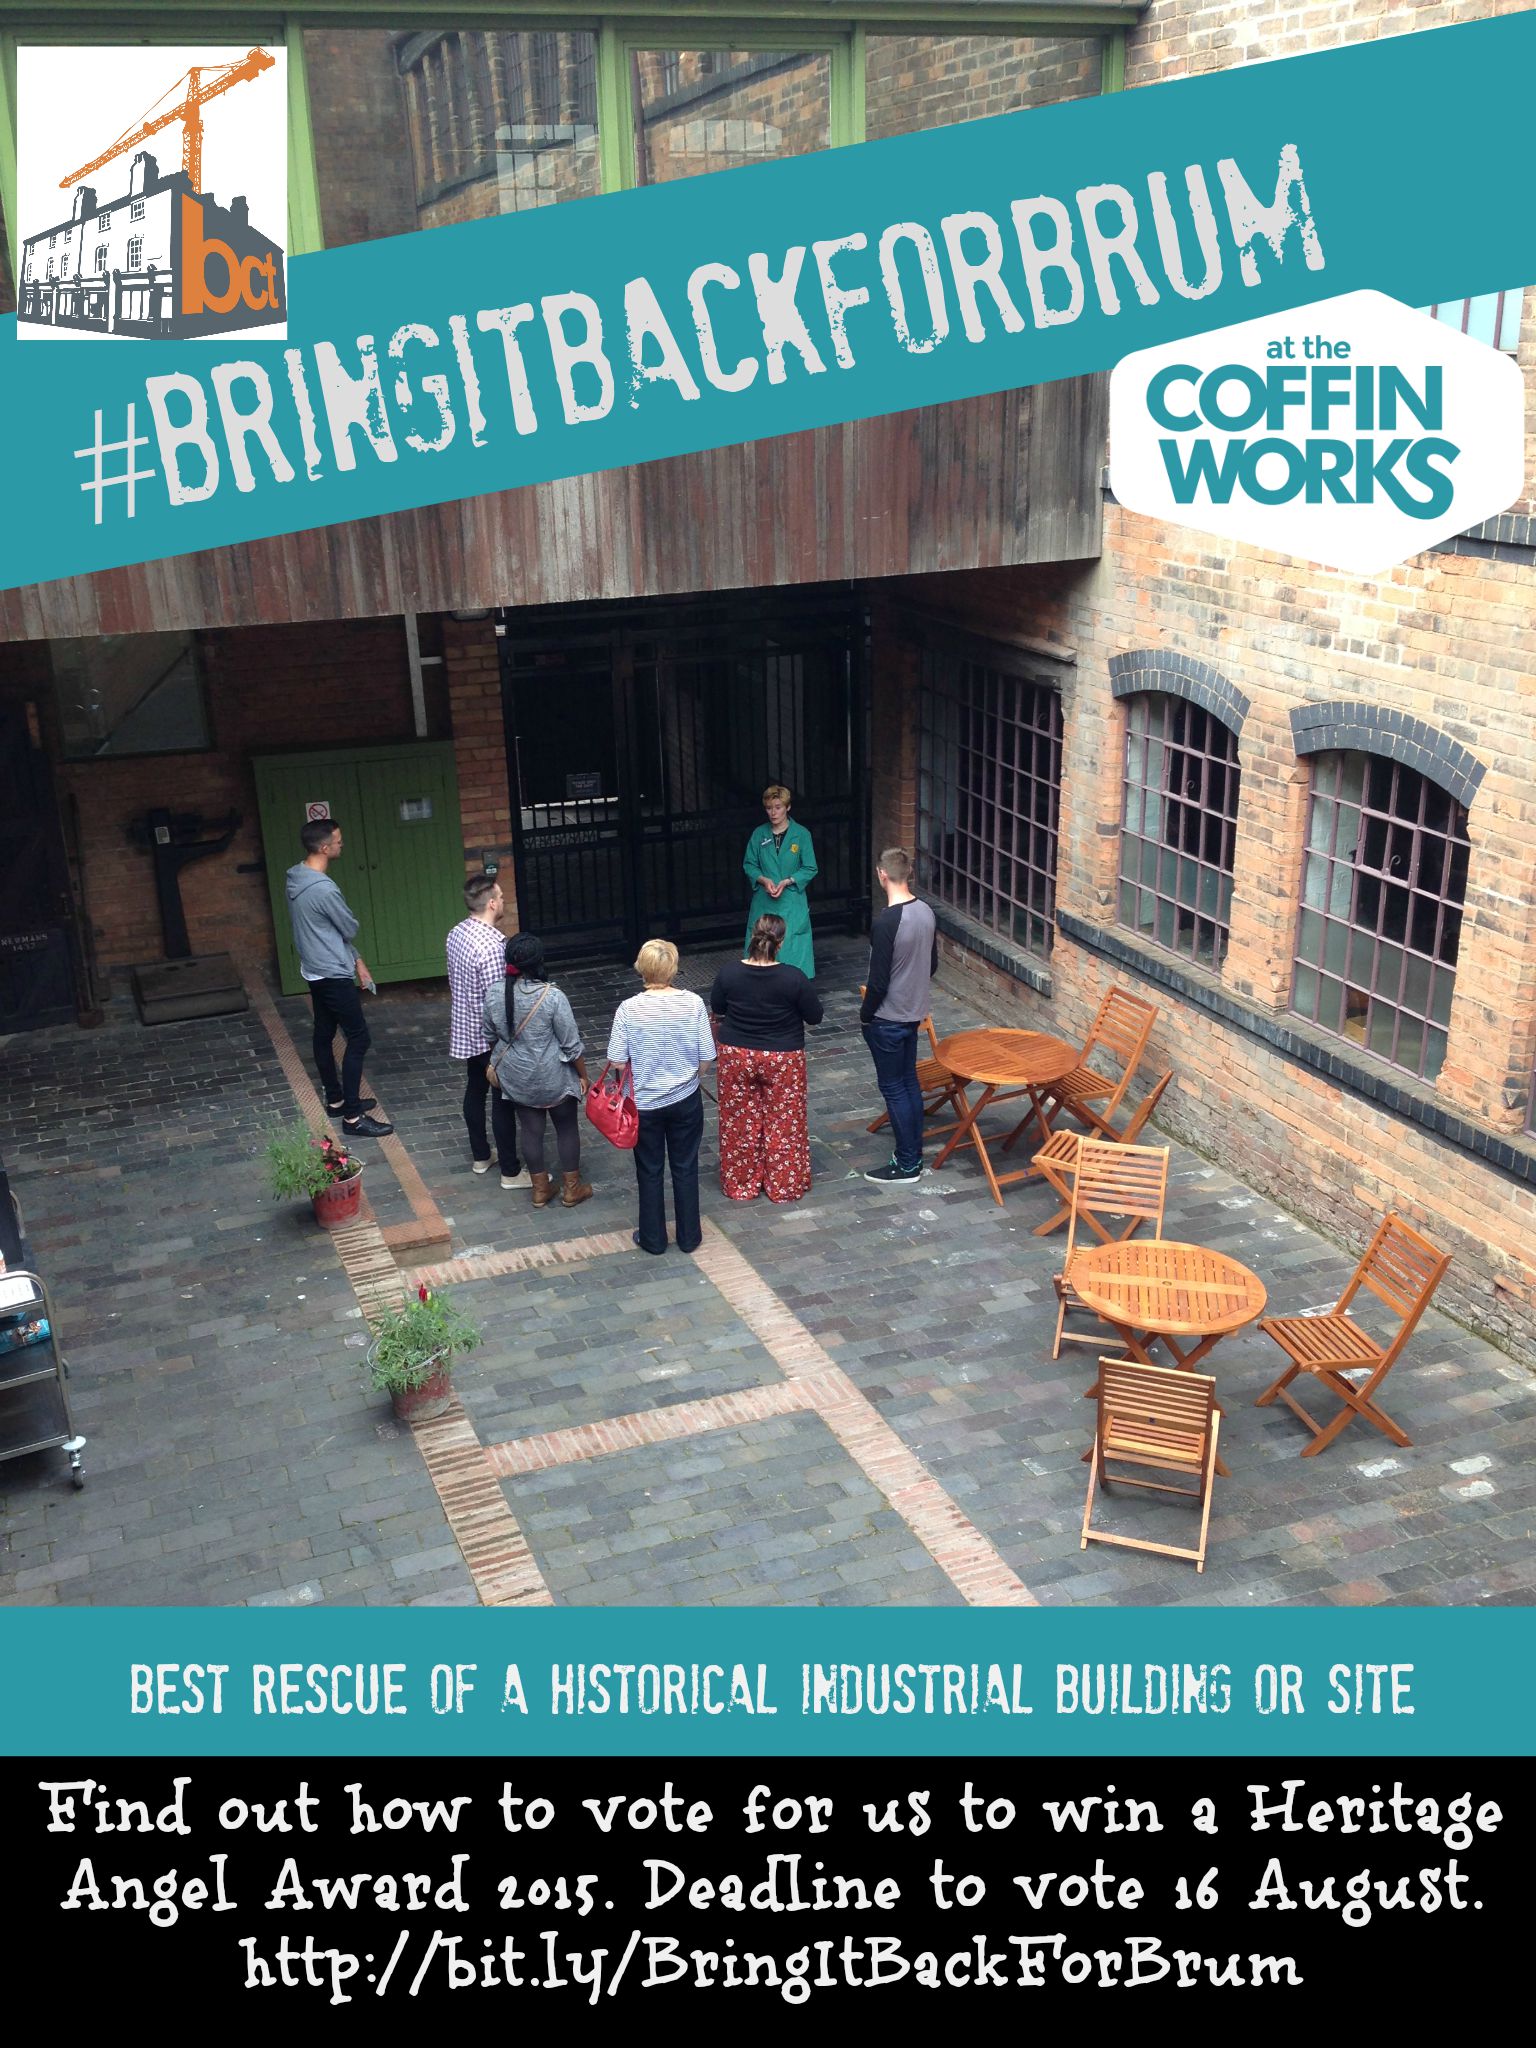 #BringItBackForBrum Poster text reads "find out how to vote for us to win a heritage angel award 2015. deadline to vote is 16 august http://bit.ly/bringitbackforbrum